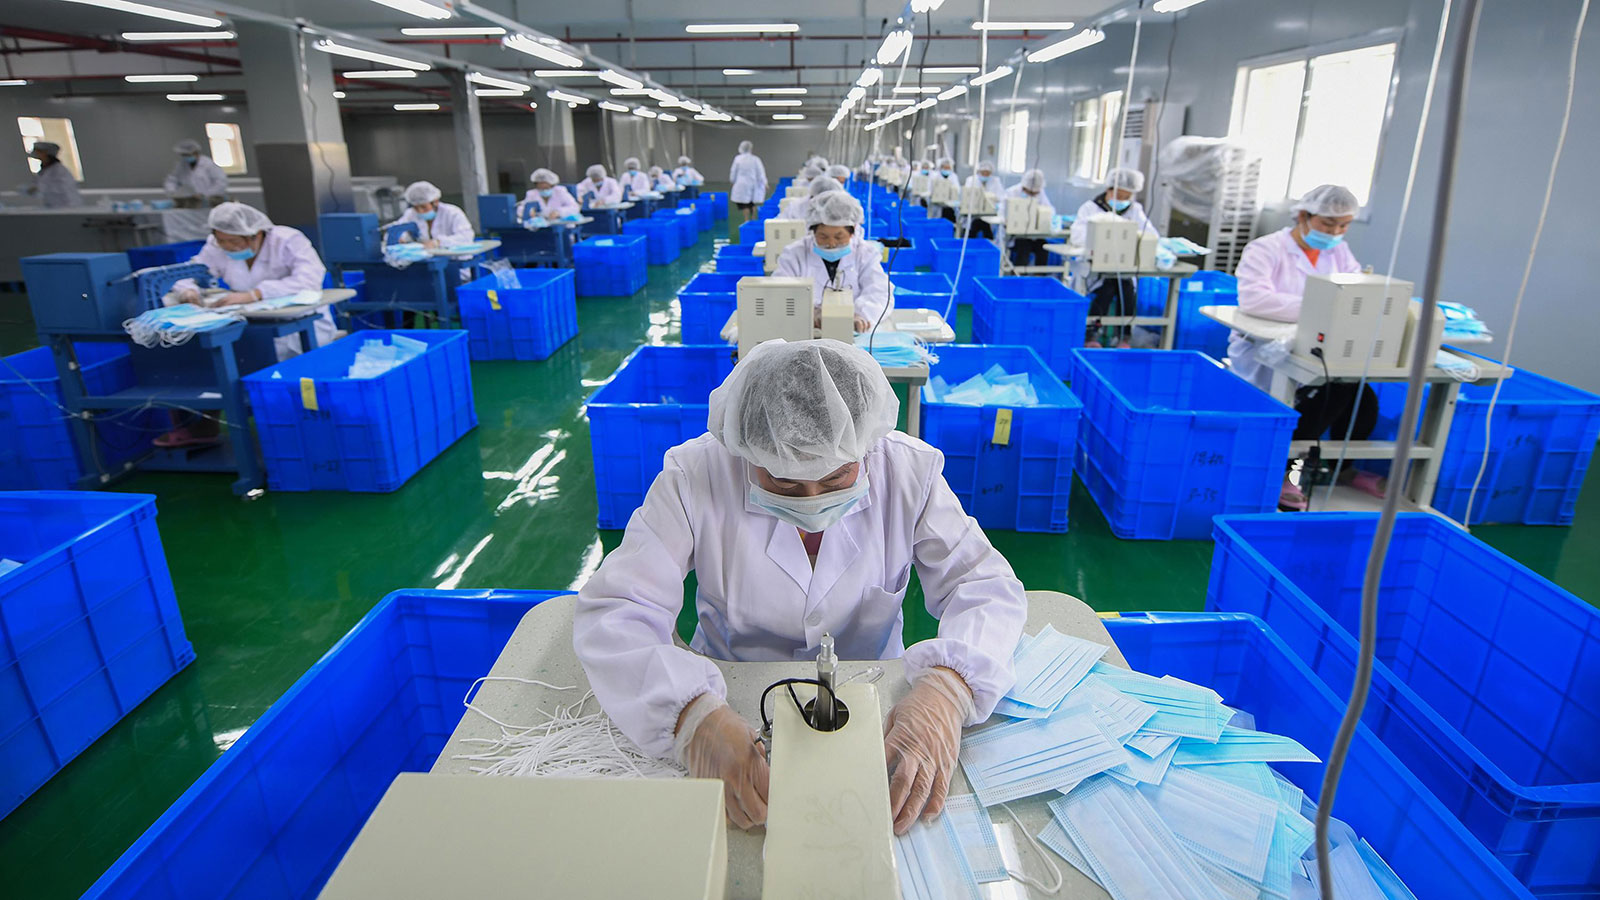 Employees produce face masks on a production line at a workshop of Hangzhou Yijia Textile Co., Ltd in Hangzhou, Zhejiang Province of China on April 23. 